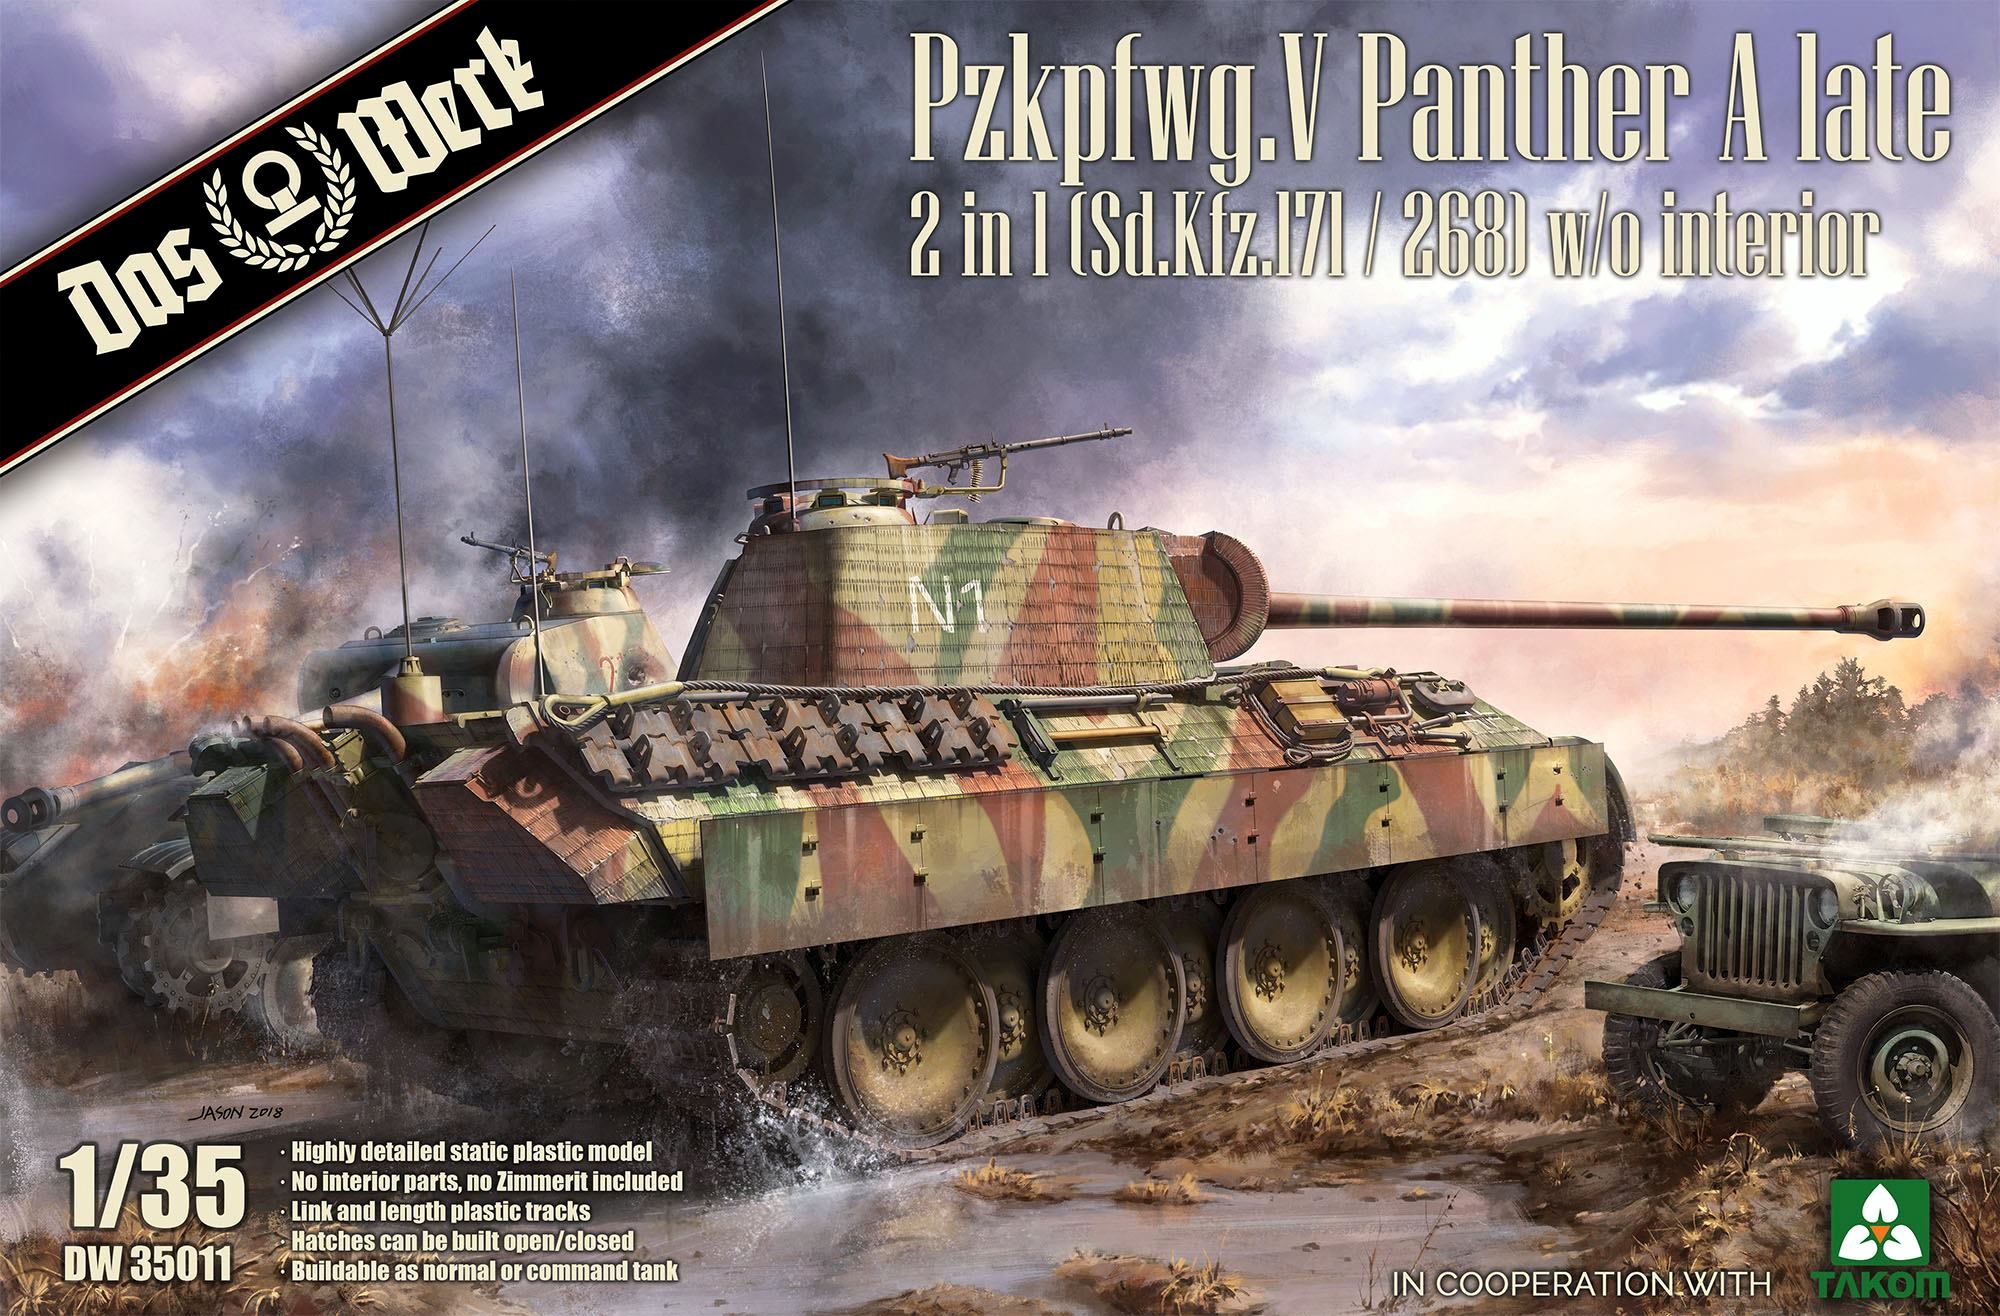 Pzkpfwg. V Panther A late - 2 in 1 (Sd.Kfz.171/268)